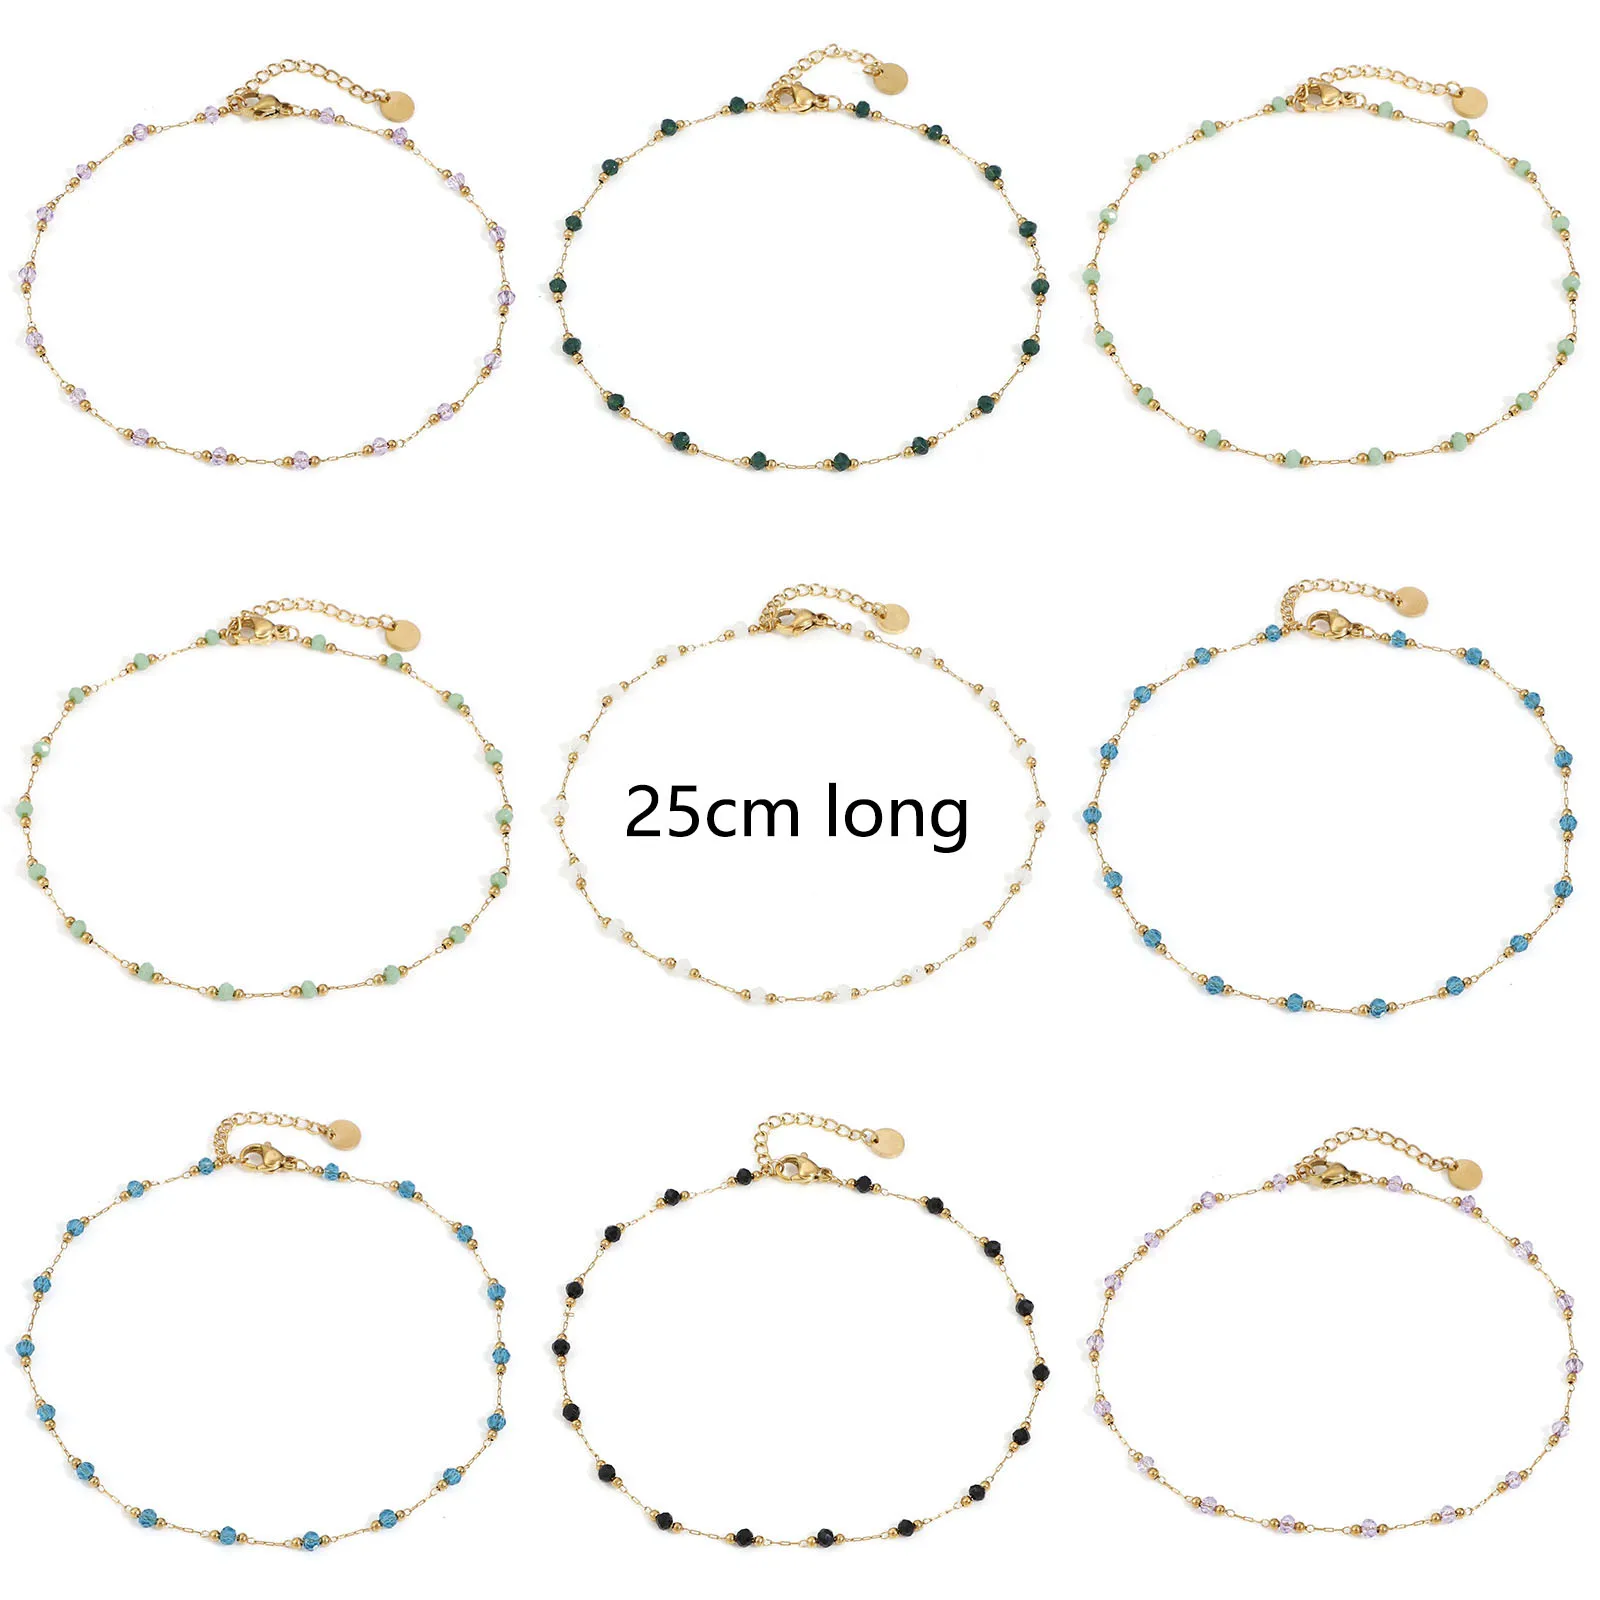 1PC 304 Stainless Steel Double Layer Anklet For Women Fashion Summer Foot Show Jewelry Natural Stone Bead Link Chain Anklet 25cm